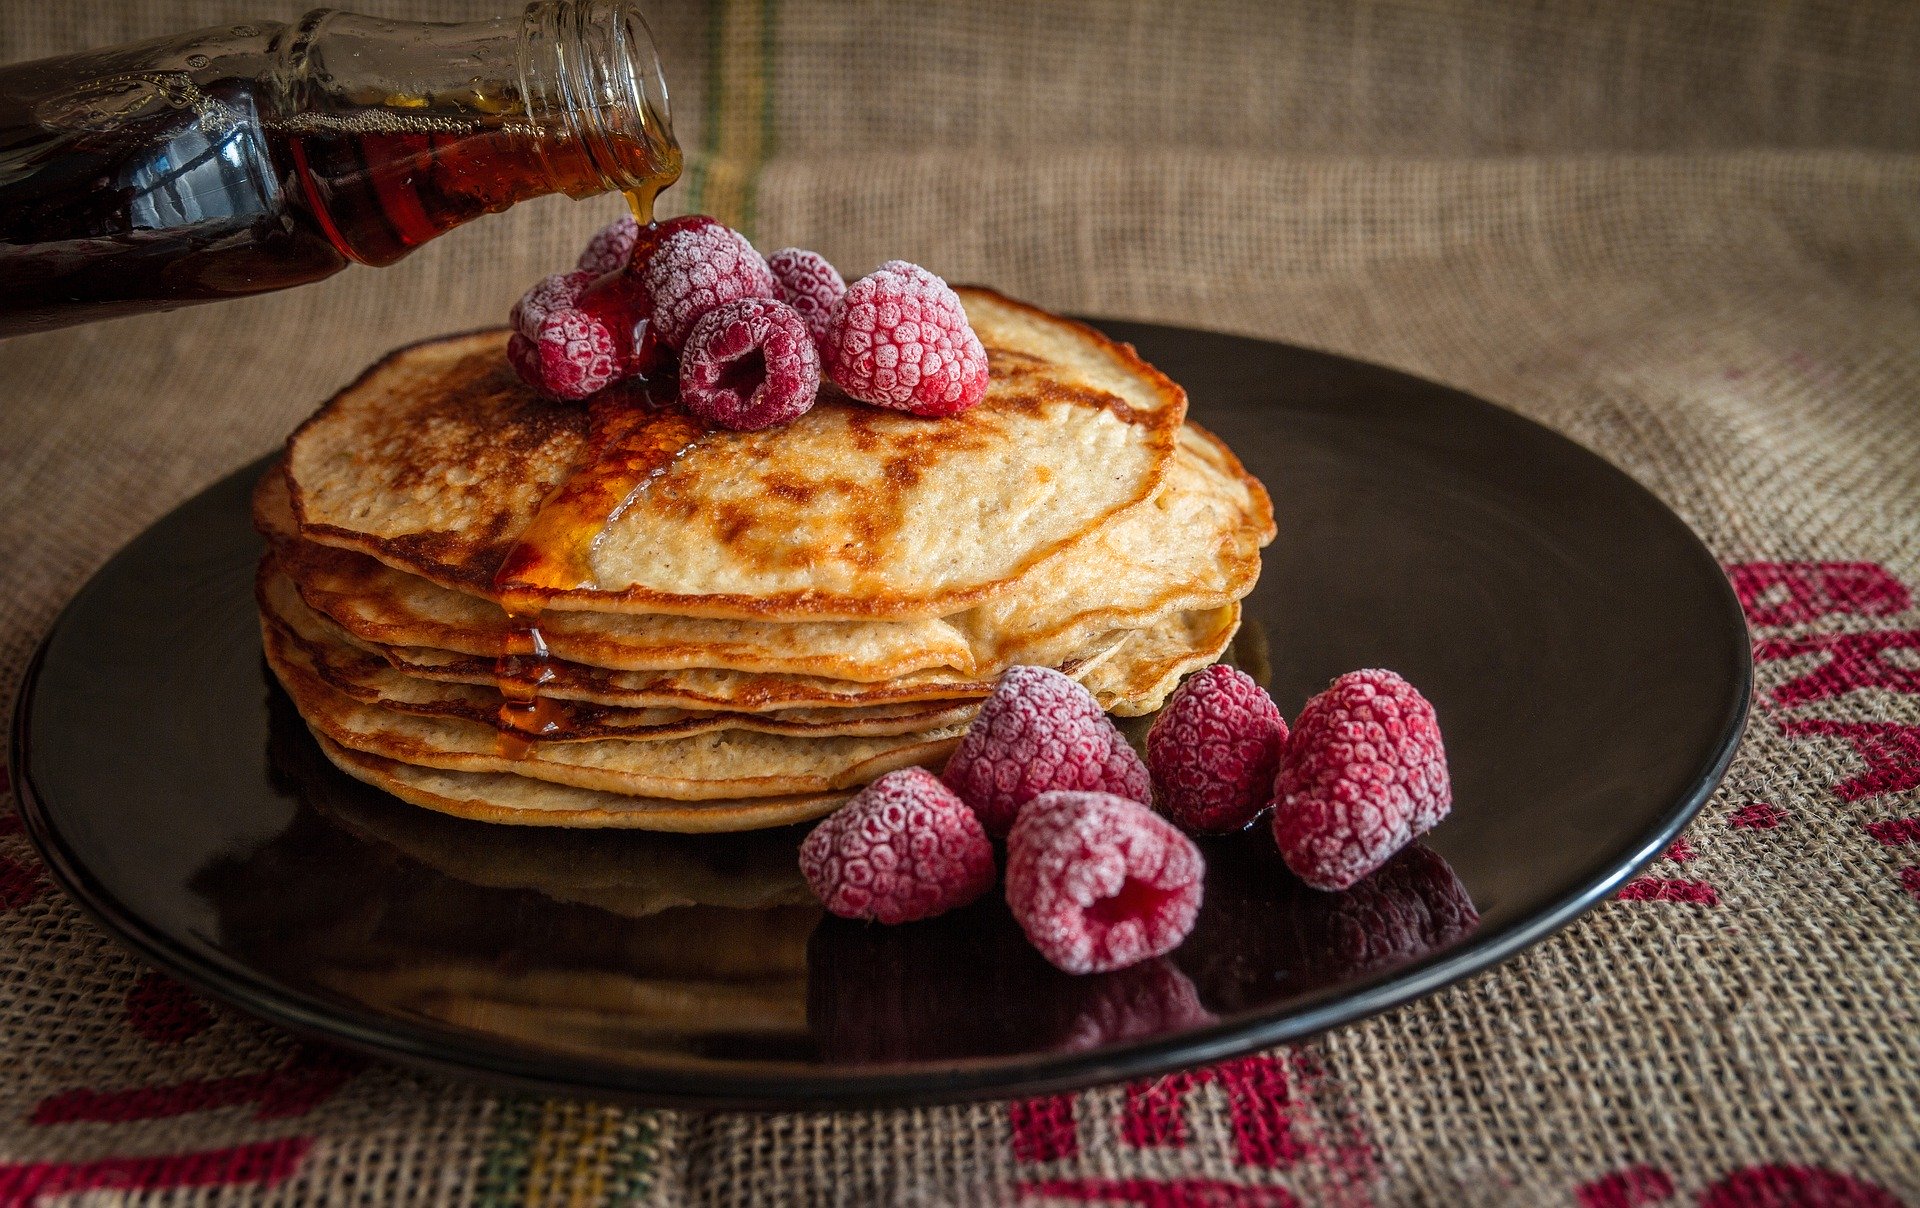 Pancakes with raspberries and maple syrup.